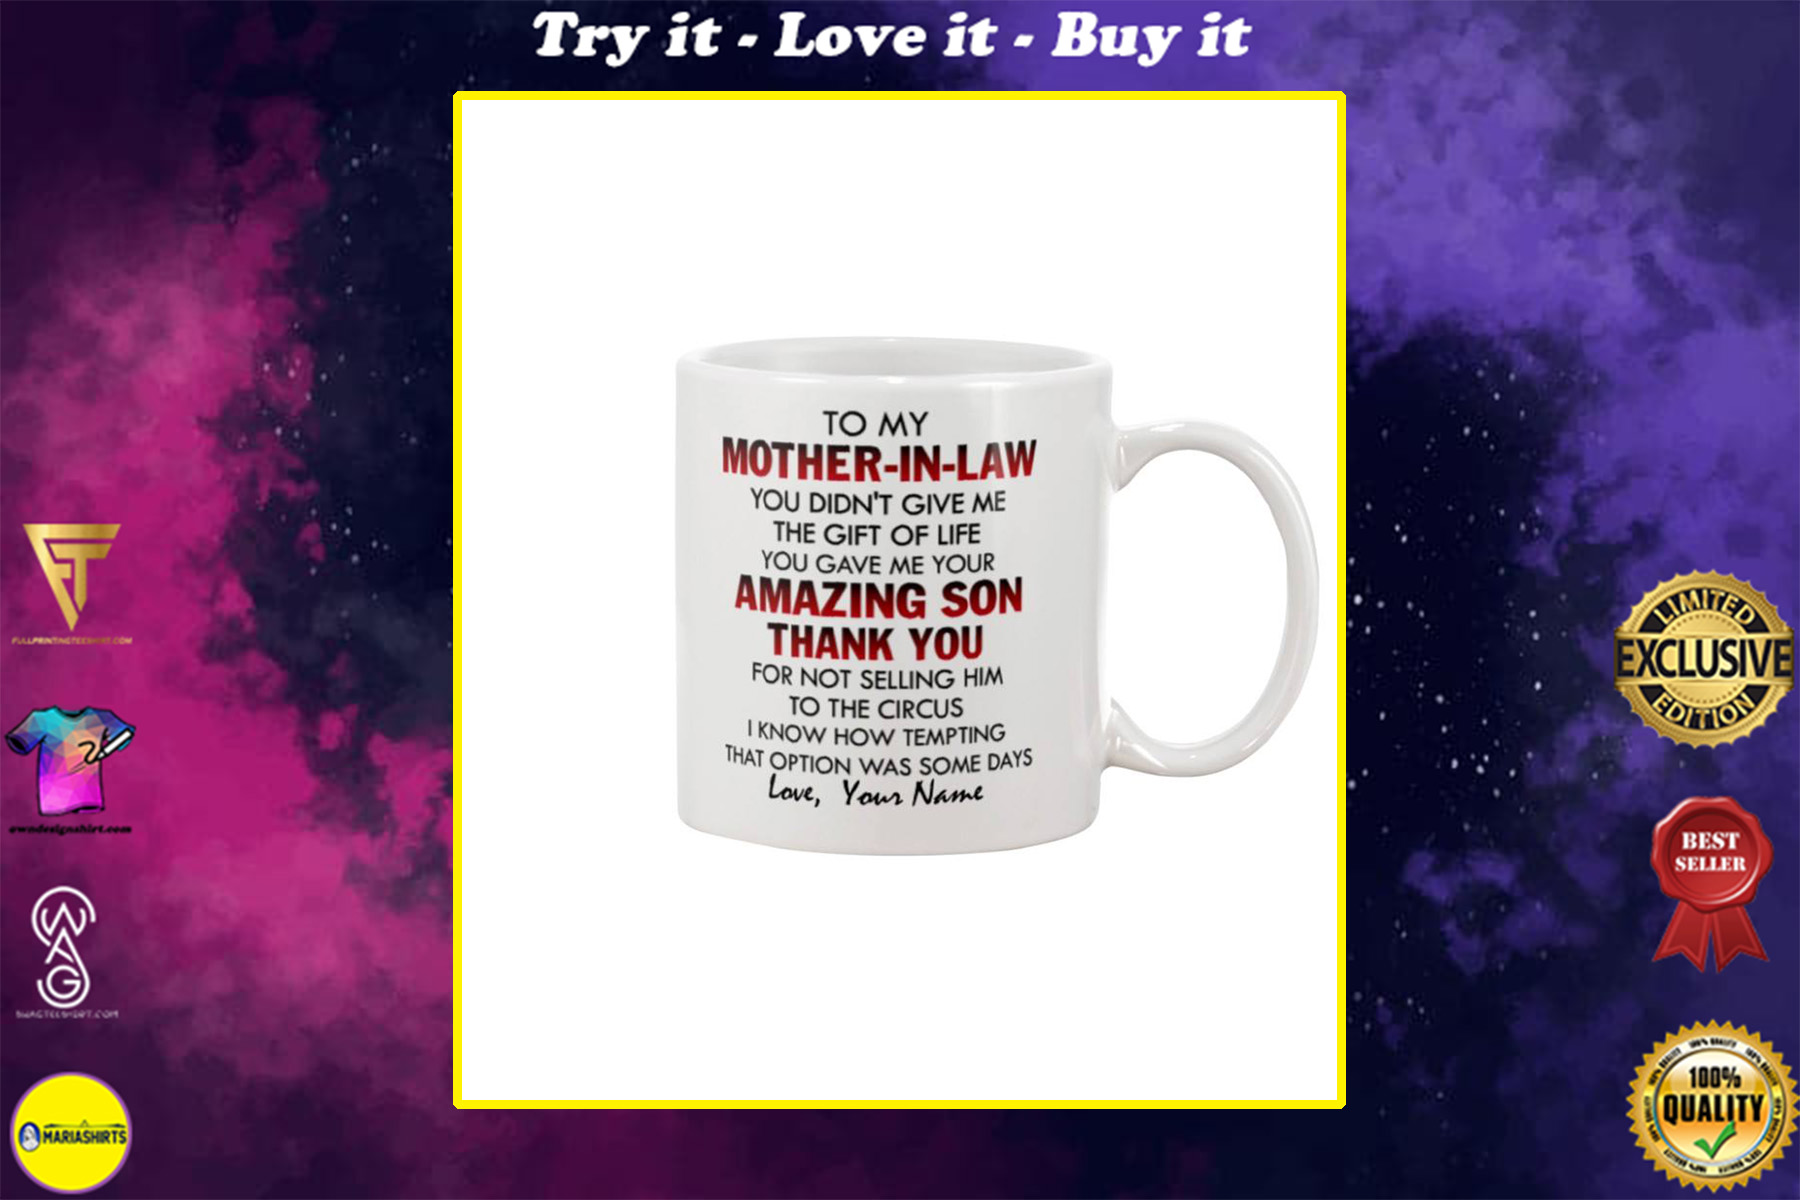 to my mother-in-law you didnt give me the gift of life you gave me your amazing son mug